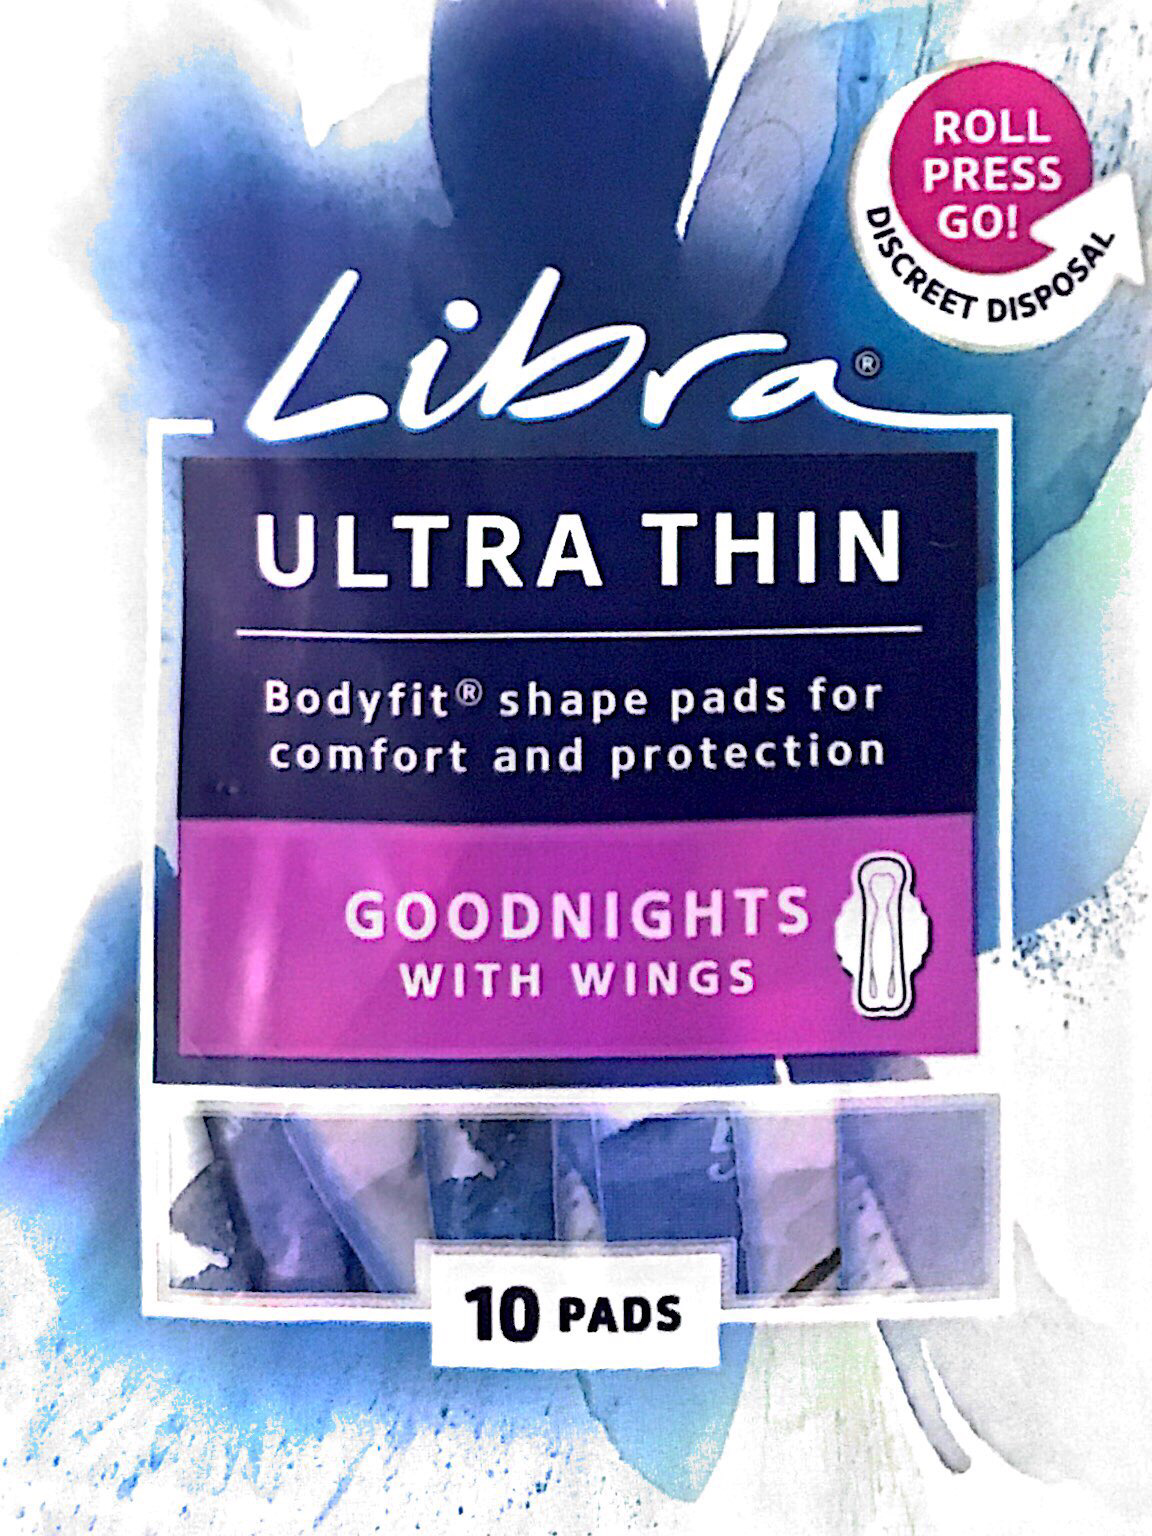 Libra ultra thin Goodnights with wings - Pads 10